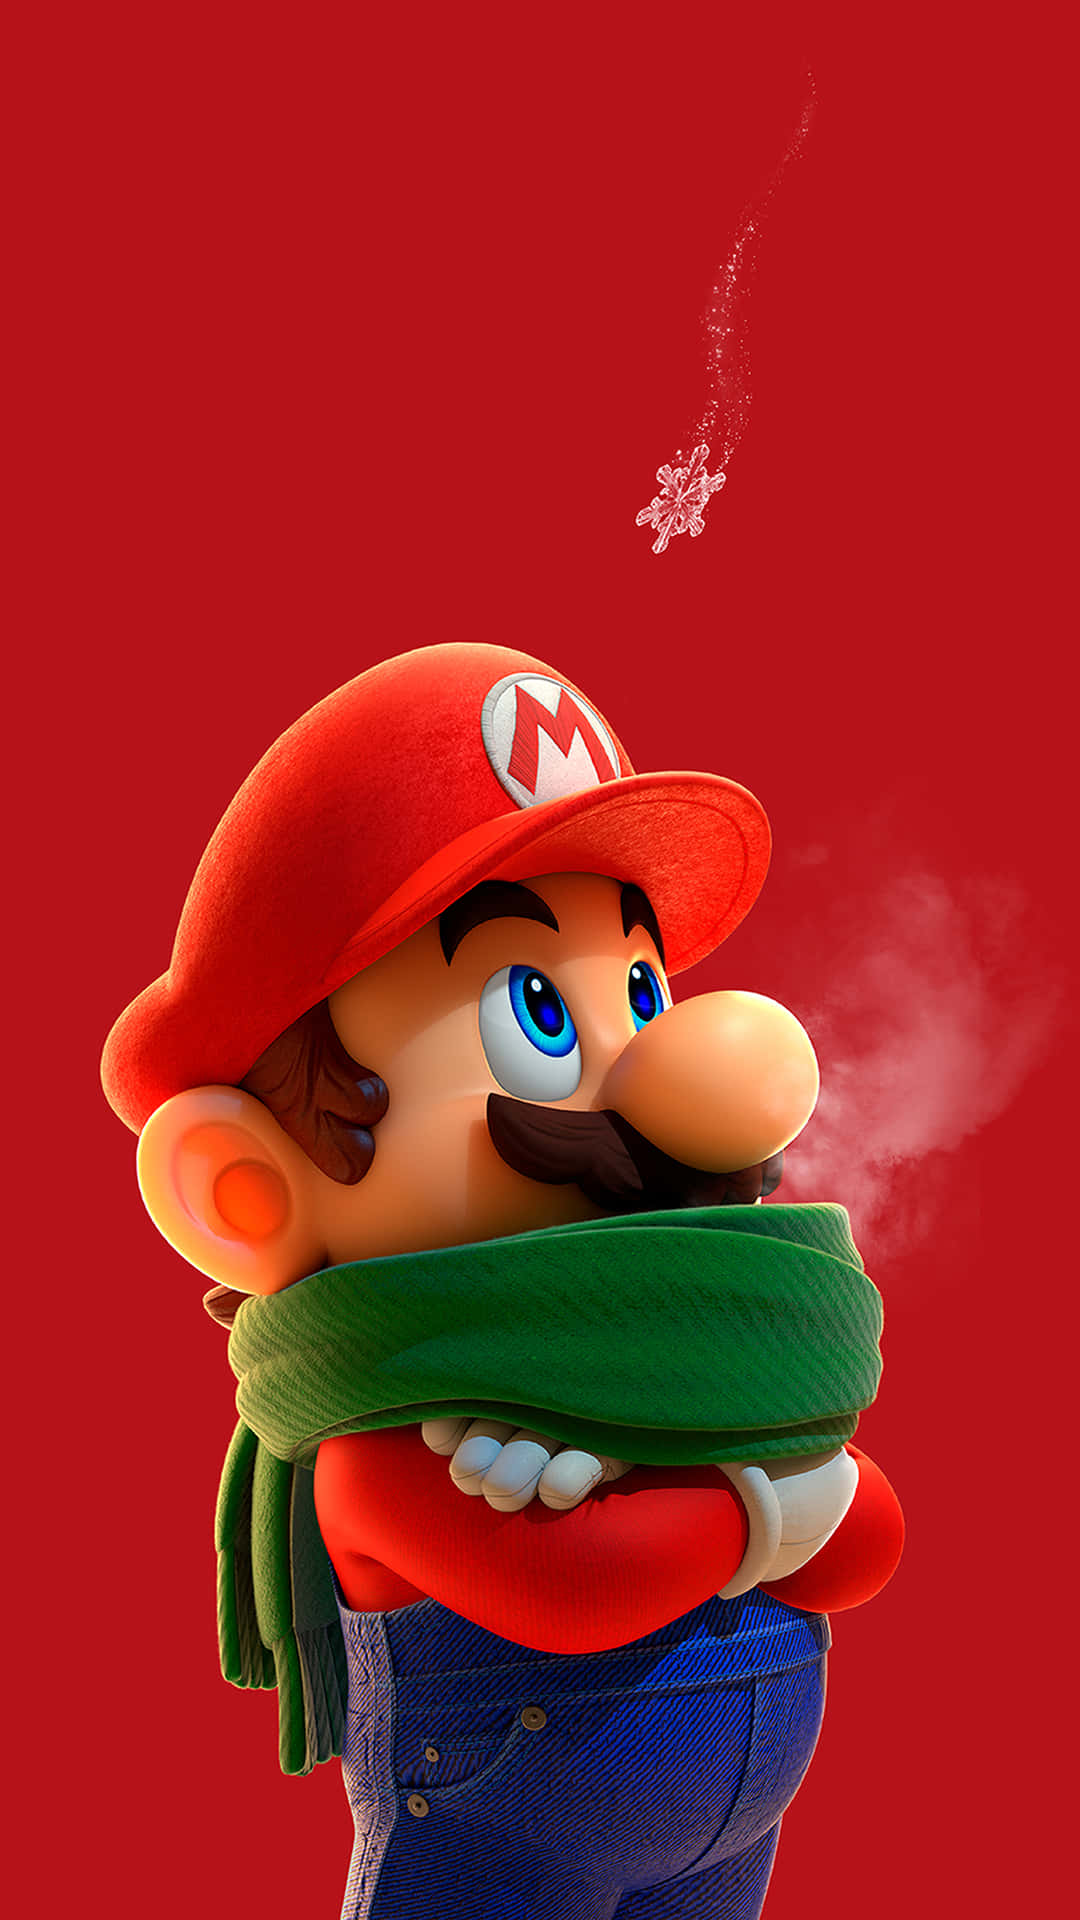 Download Unlock the gaming experience with a Nintendo Iphone Wallpaper   Wallpaperscom